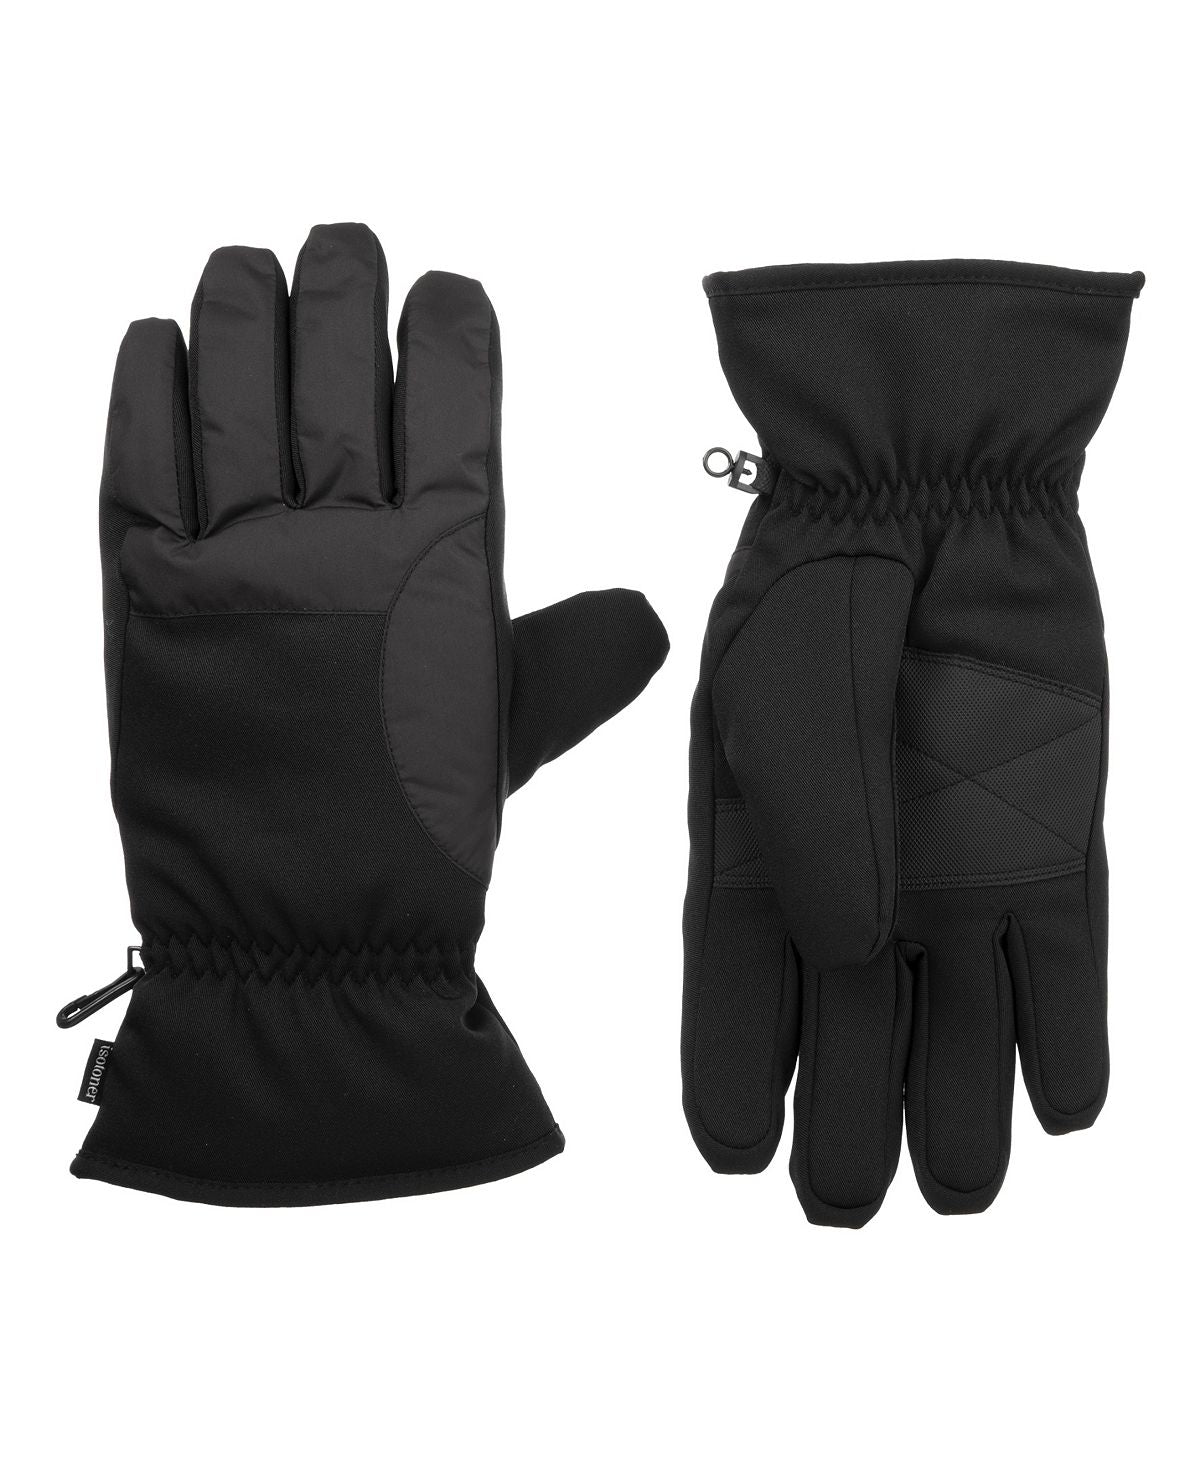 Isotoner Signature Lined Sport Touchscreen Gloves Black